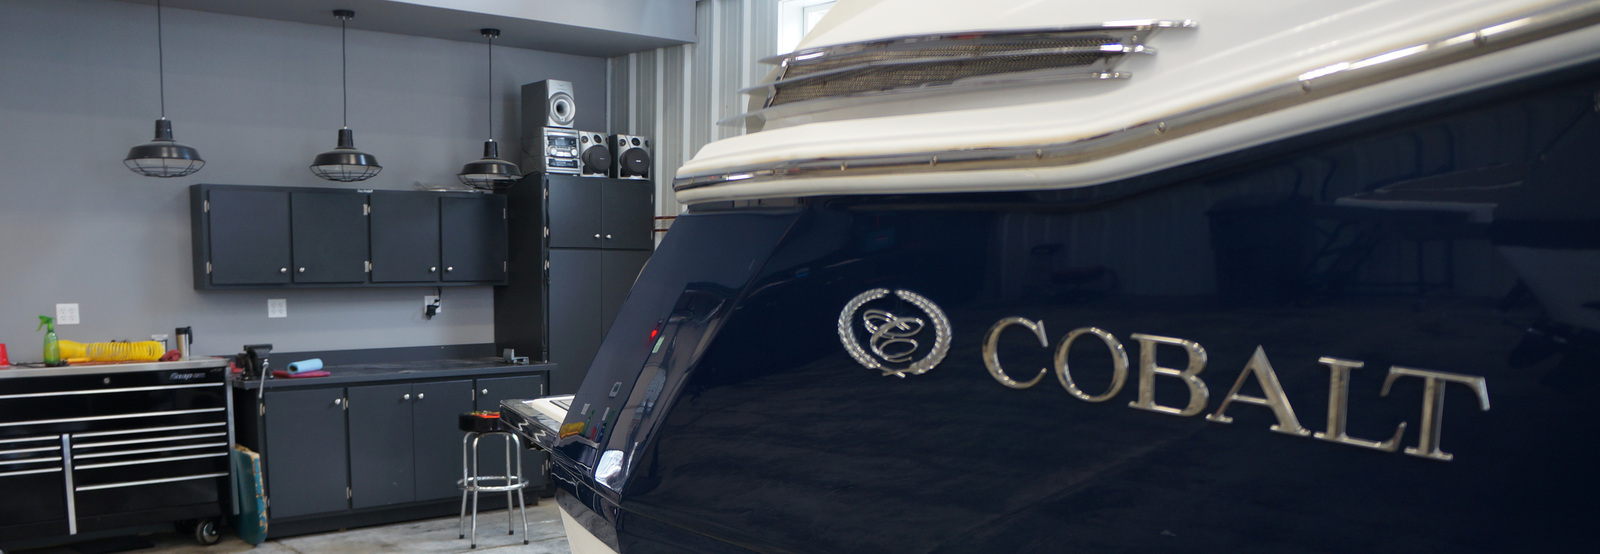 A cobalt boat sits front and center as it rests in a shop waiting to be serviced.